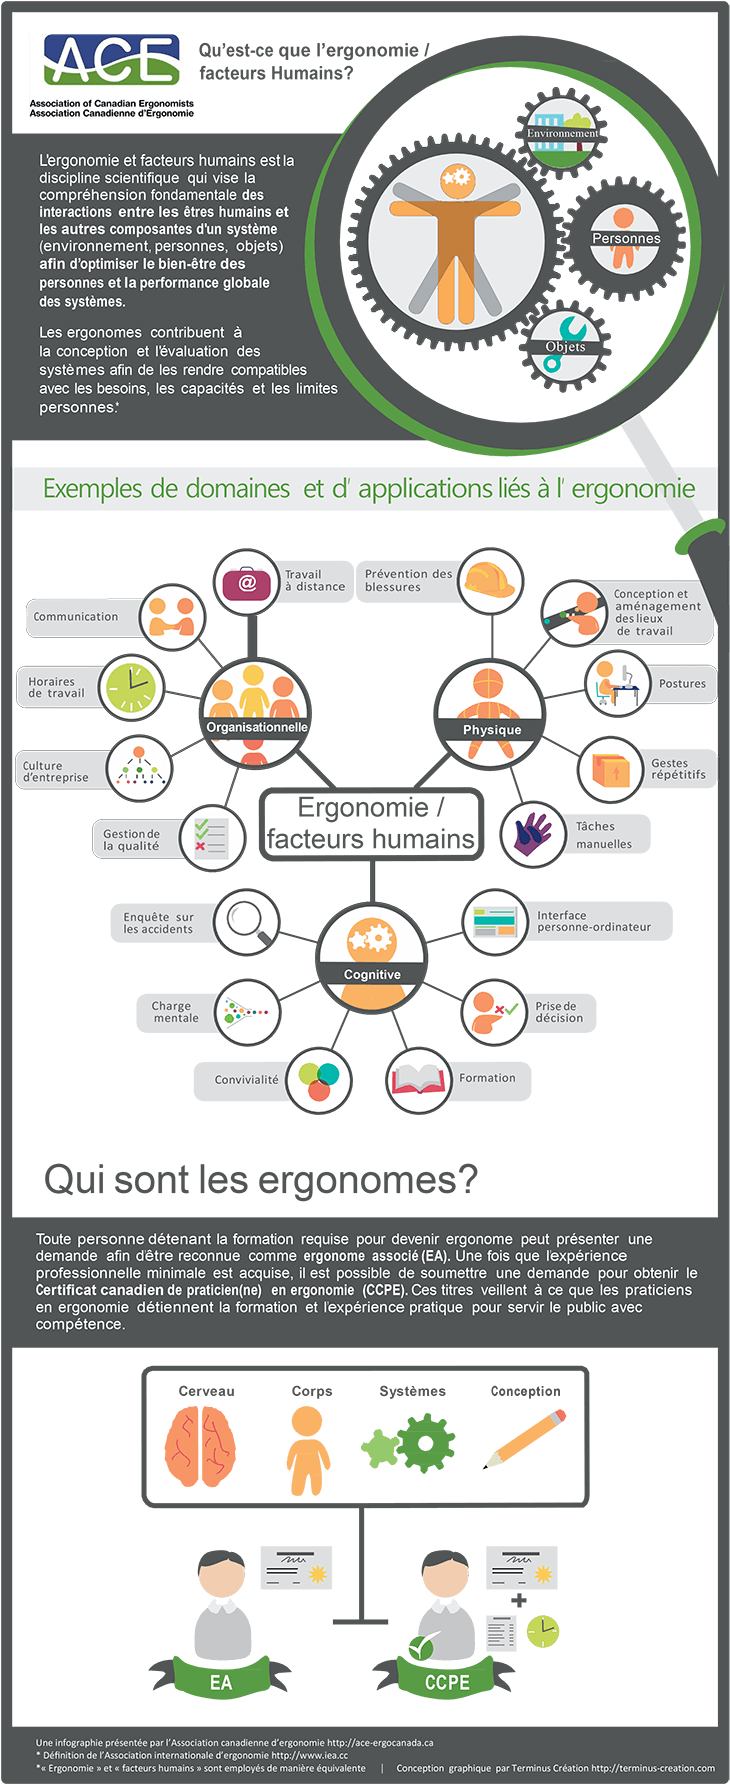 ACE 2018 Infographie